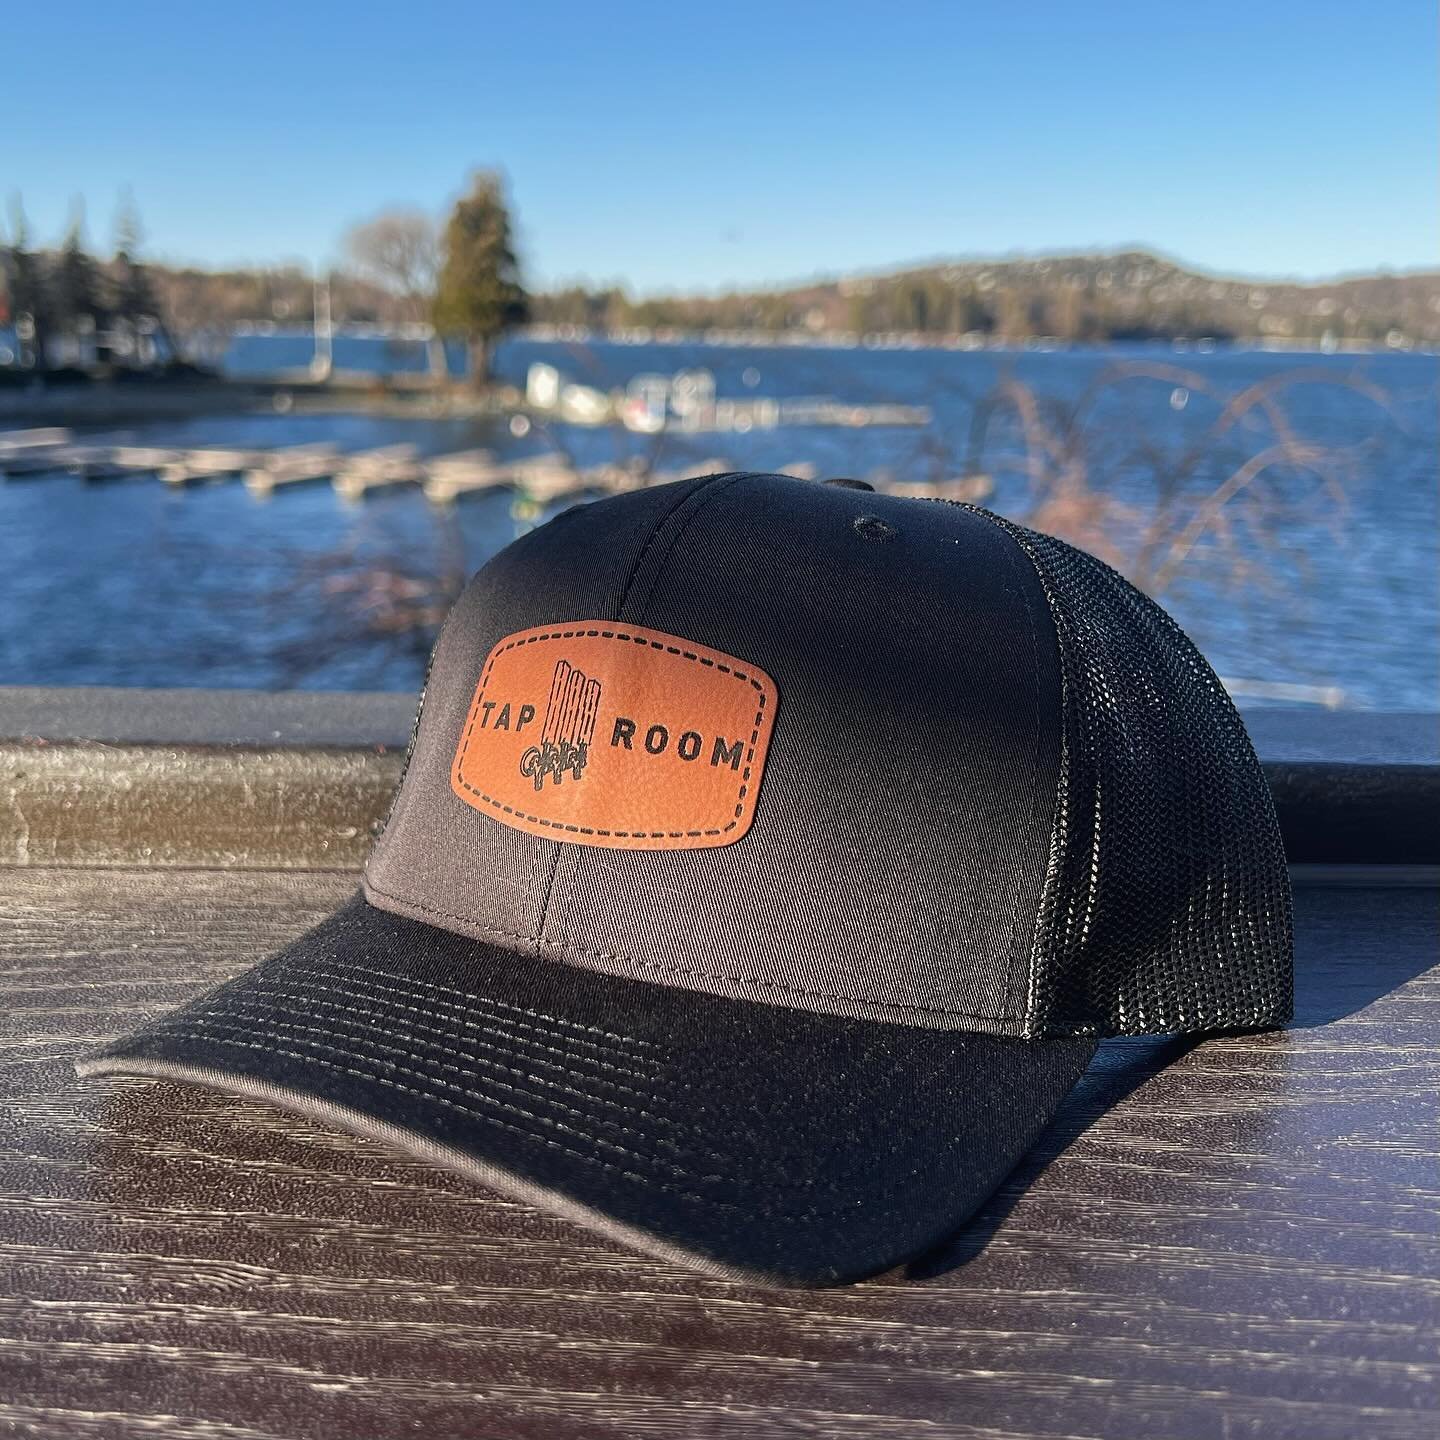 ☀️ It&rsquo;s officially hat season! 🧢 Perfect for the lake on a sunny day. We have adjustable #truckerhats, #dadhats and some new merch on the way. 

🌱 Now that Spring has sprung, we&rsquo;re offering our limited edition beanies as a buy one, get 